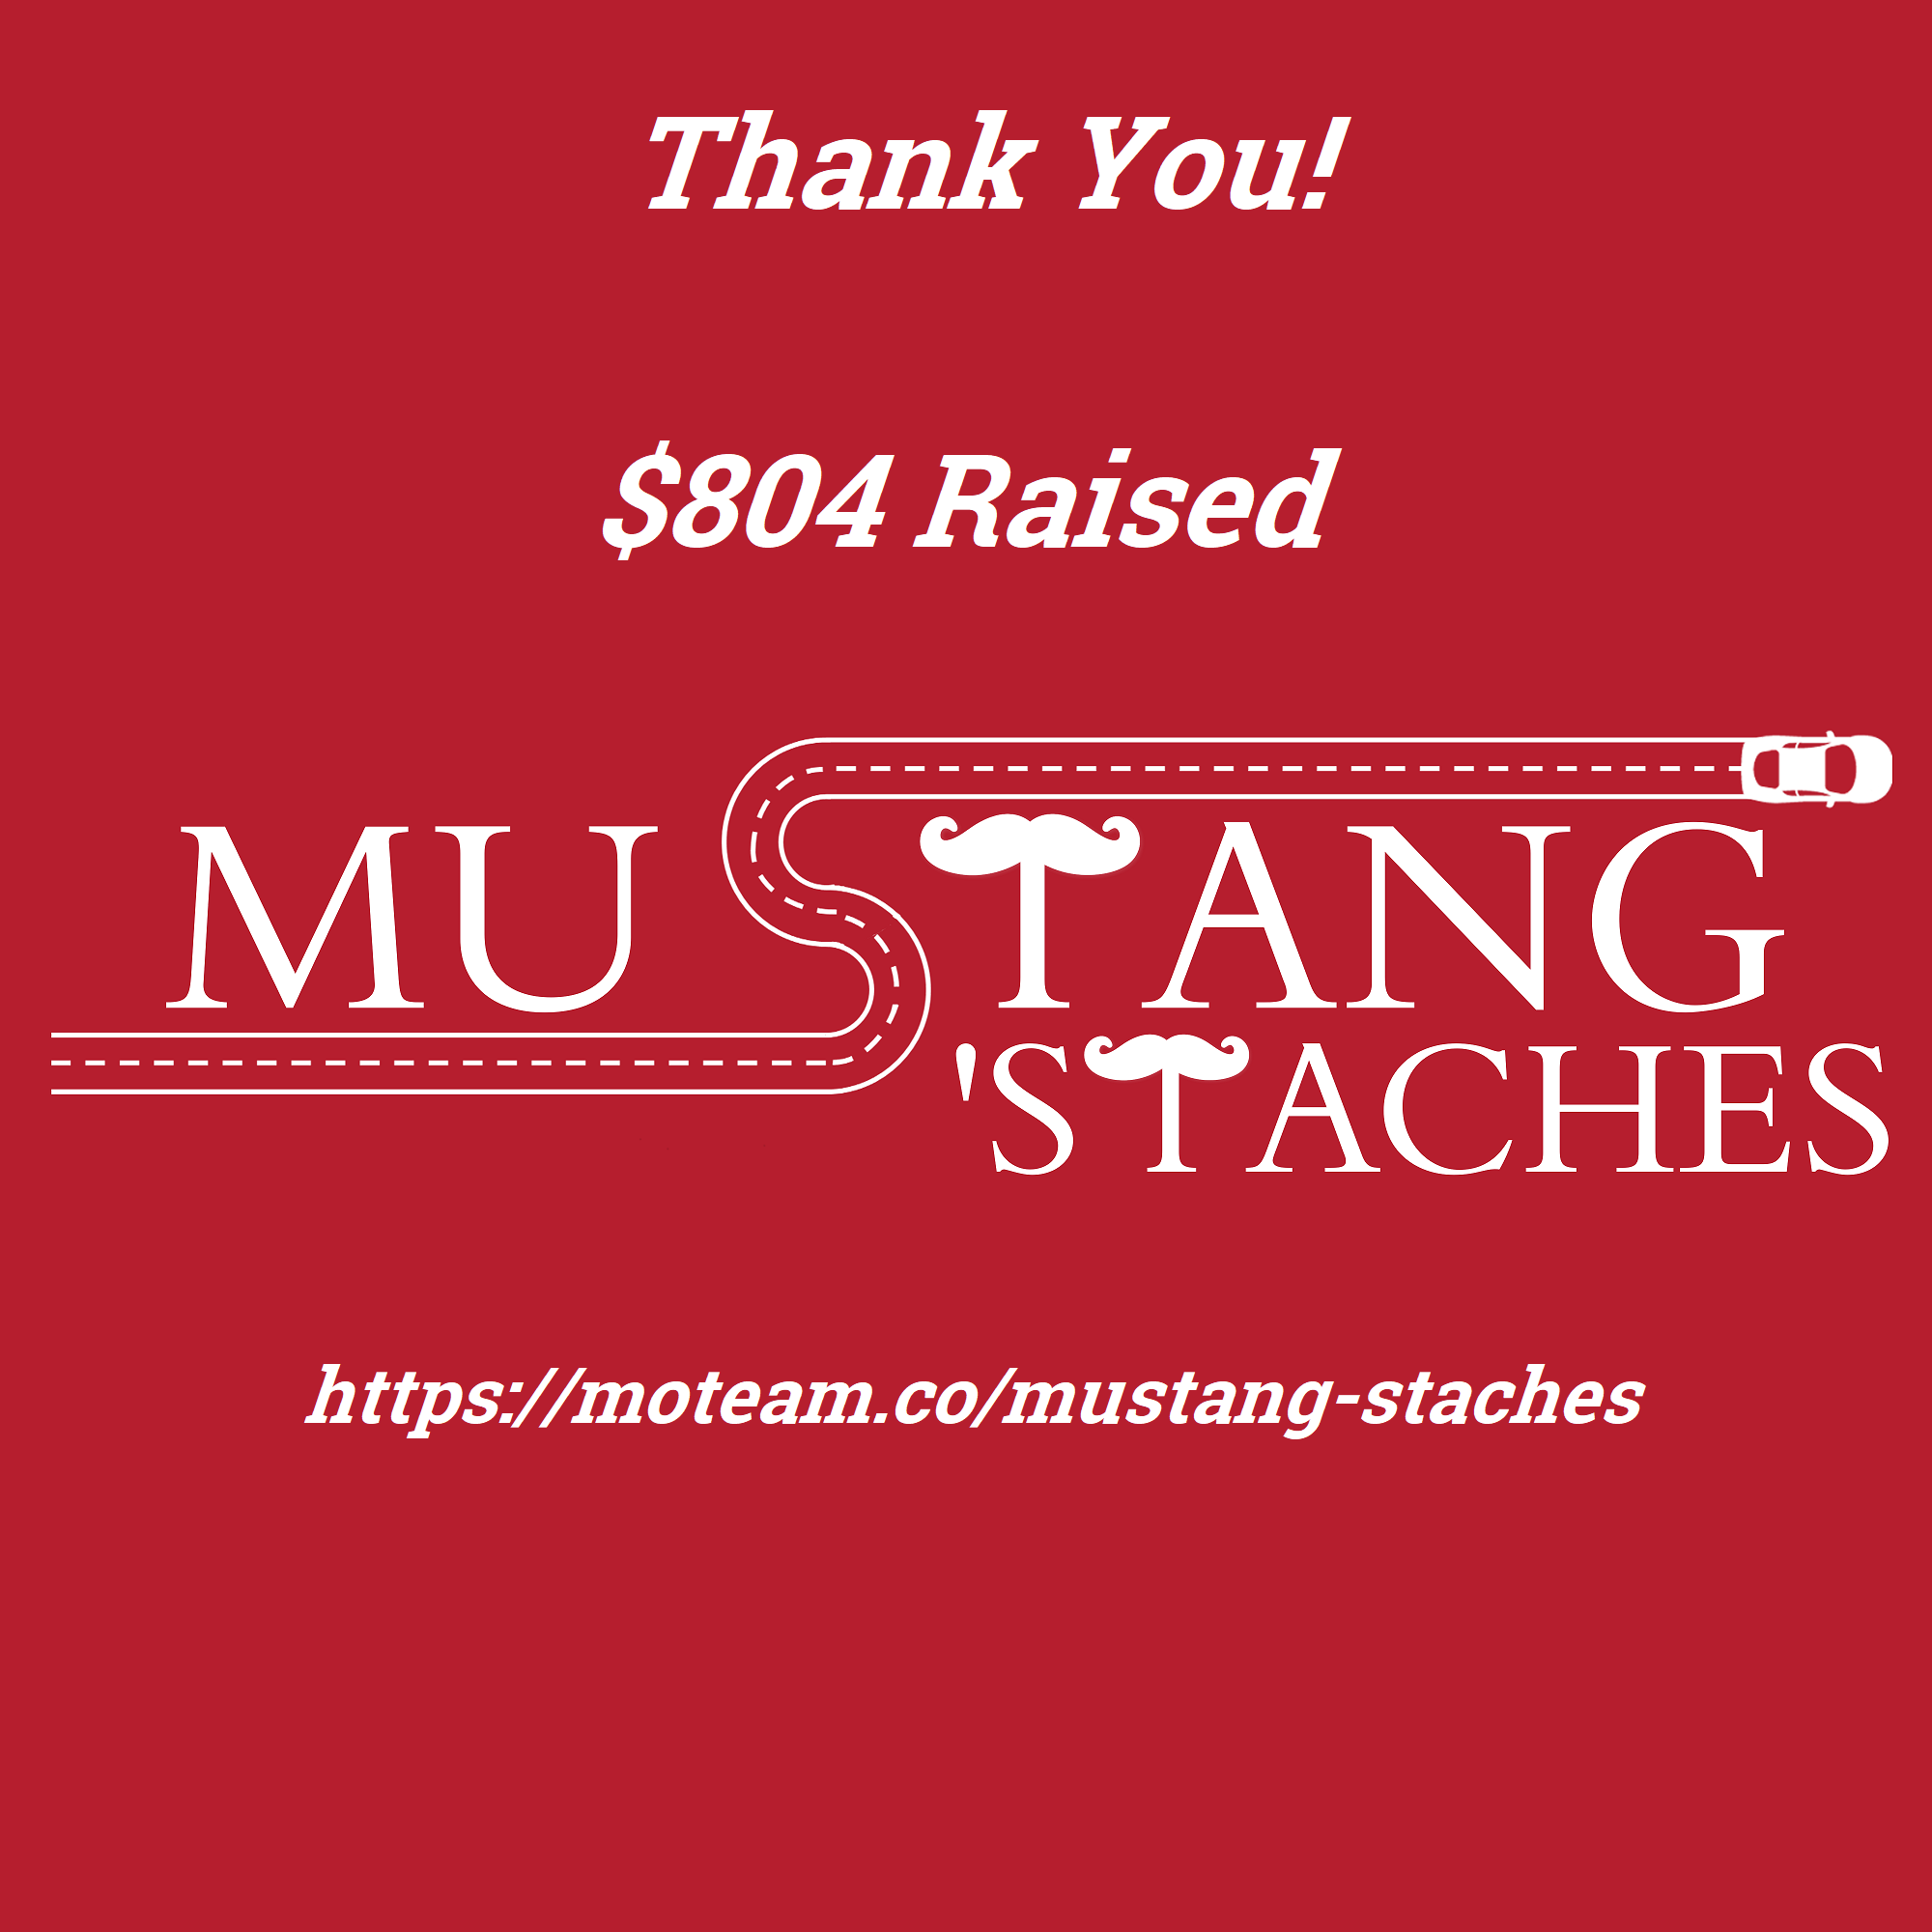 Thank You image for Mustang Staches